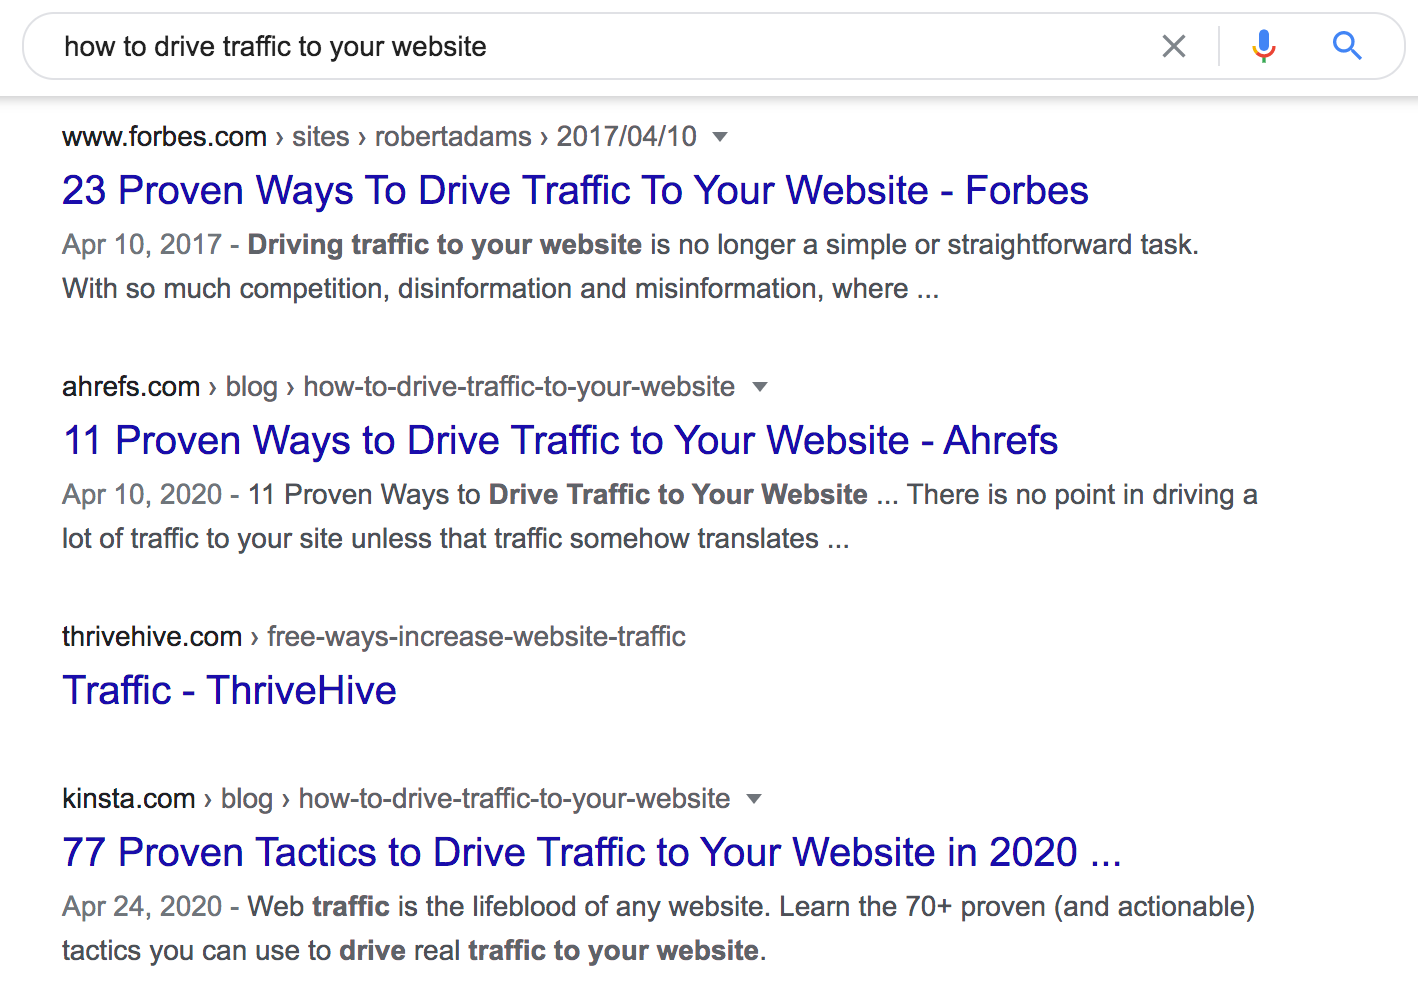 "how to drive traffic to your website" top-ranking pages